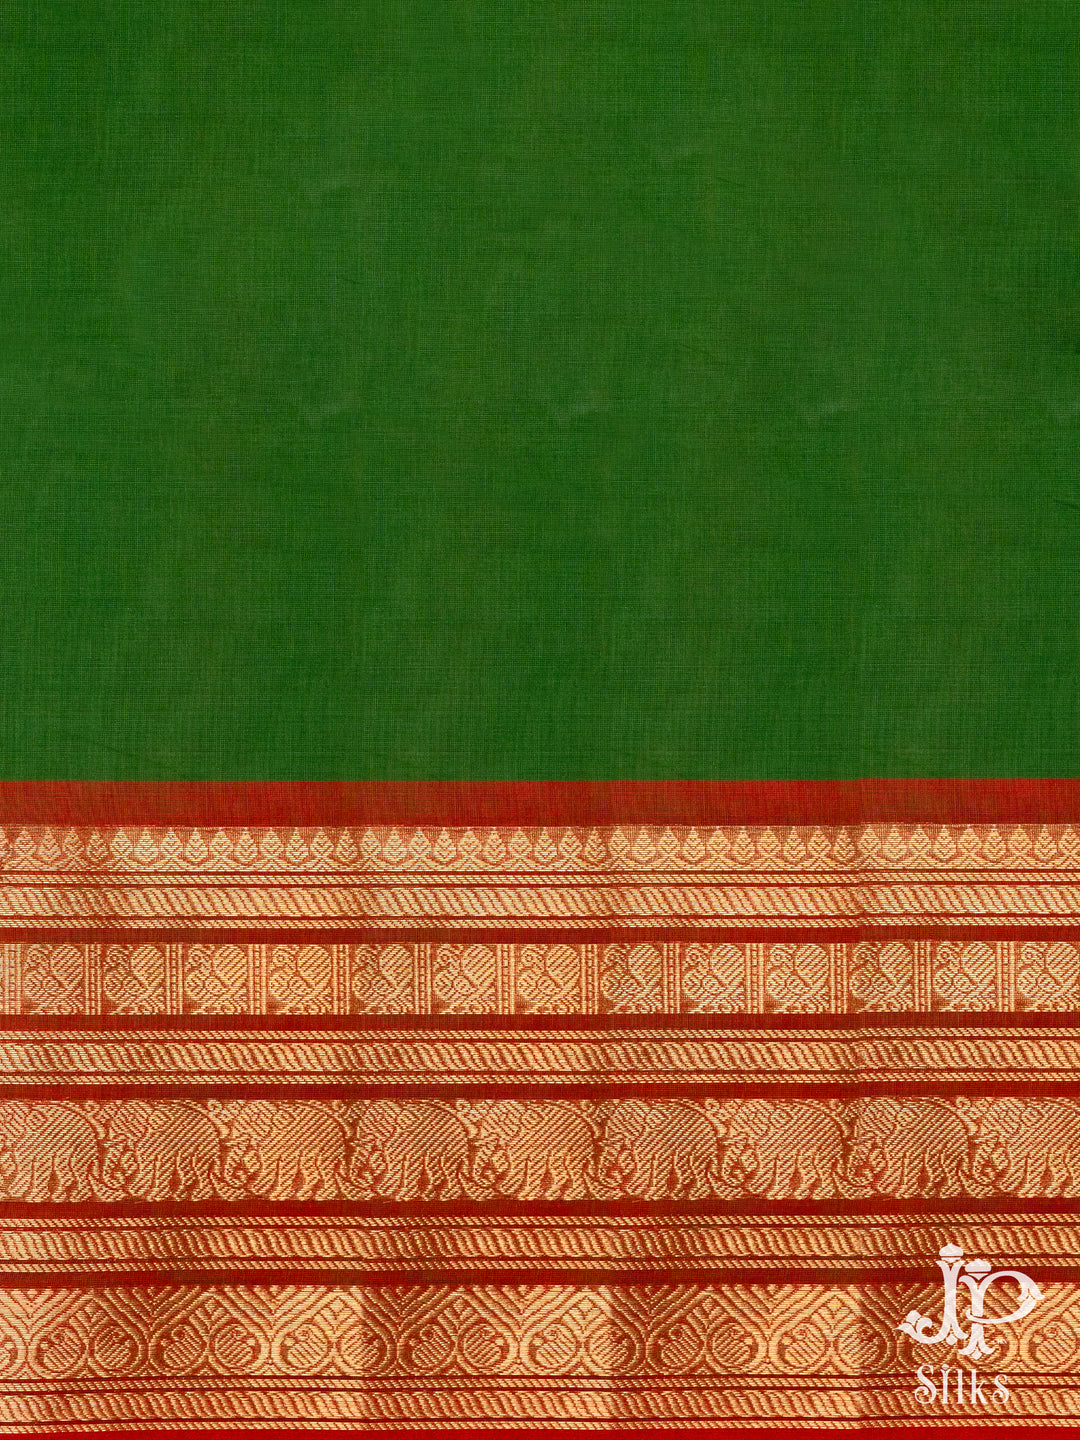 Green and Brown Cotton Saree - D9625 - VIew 3